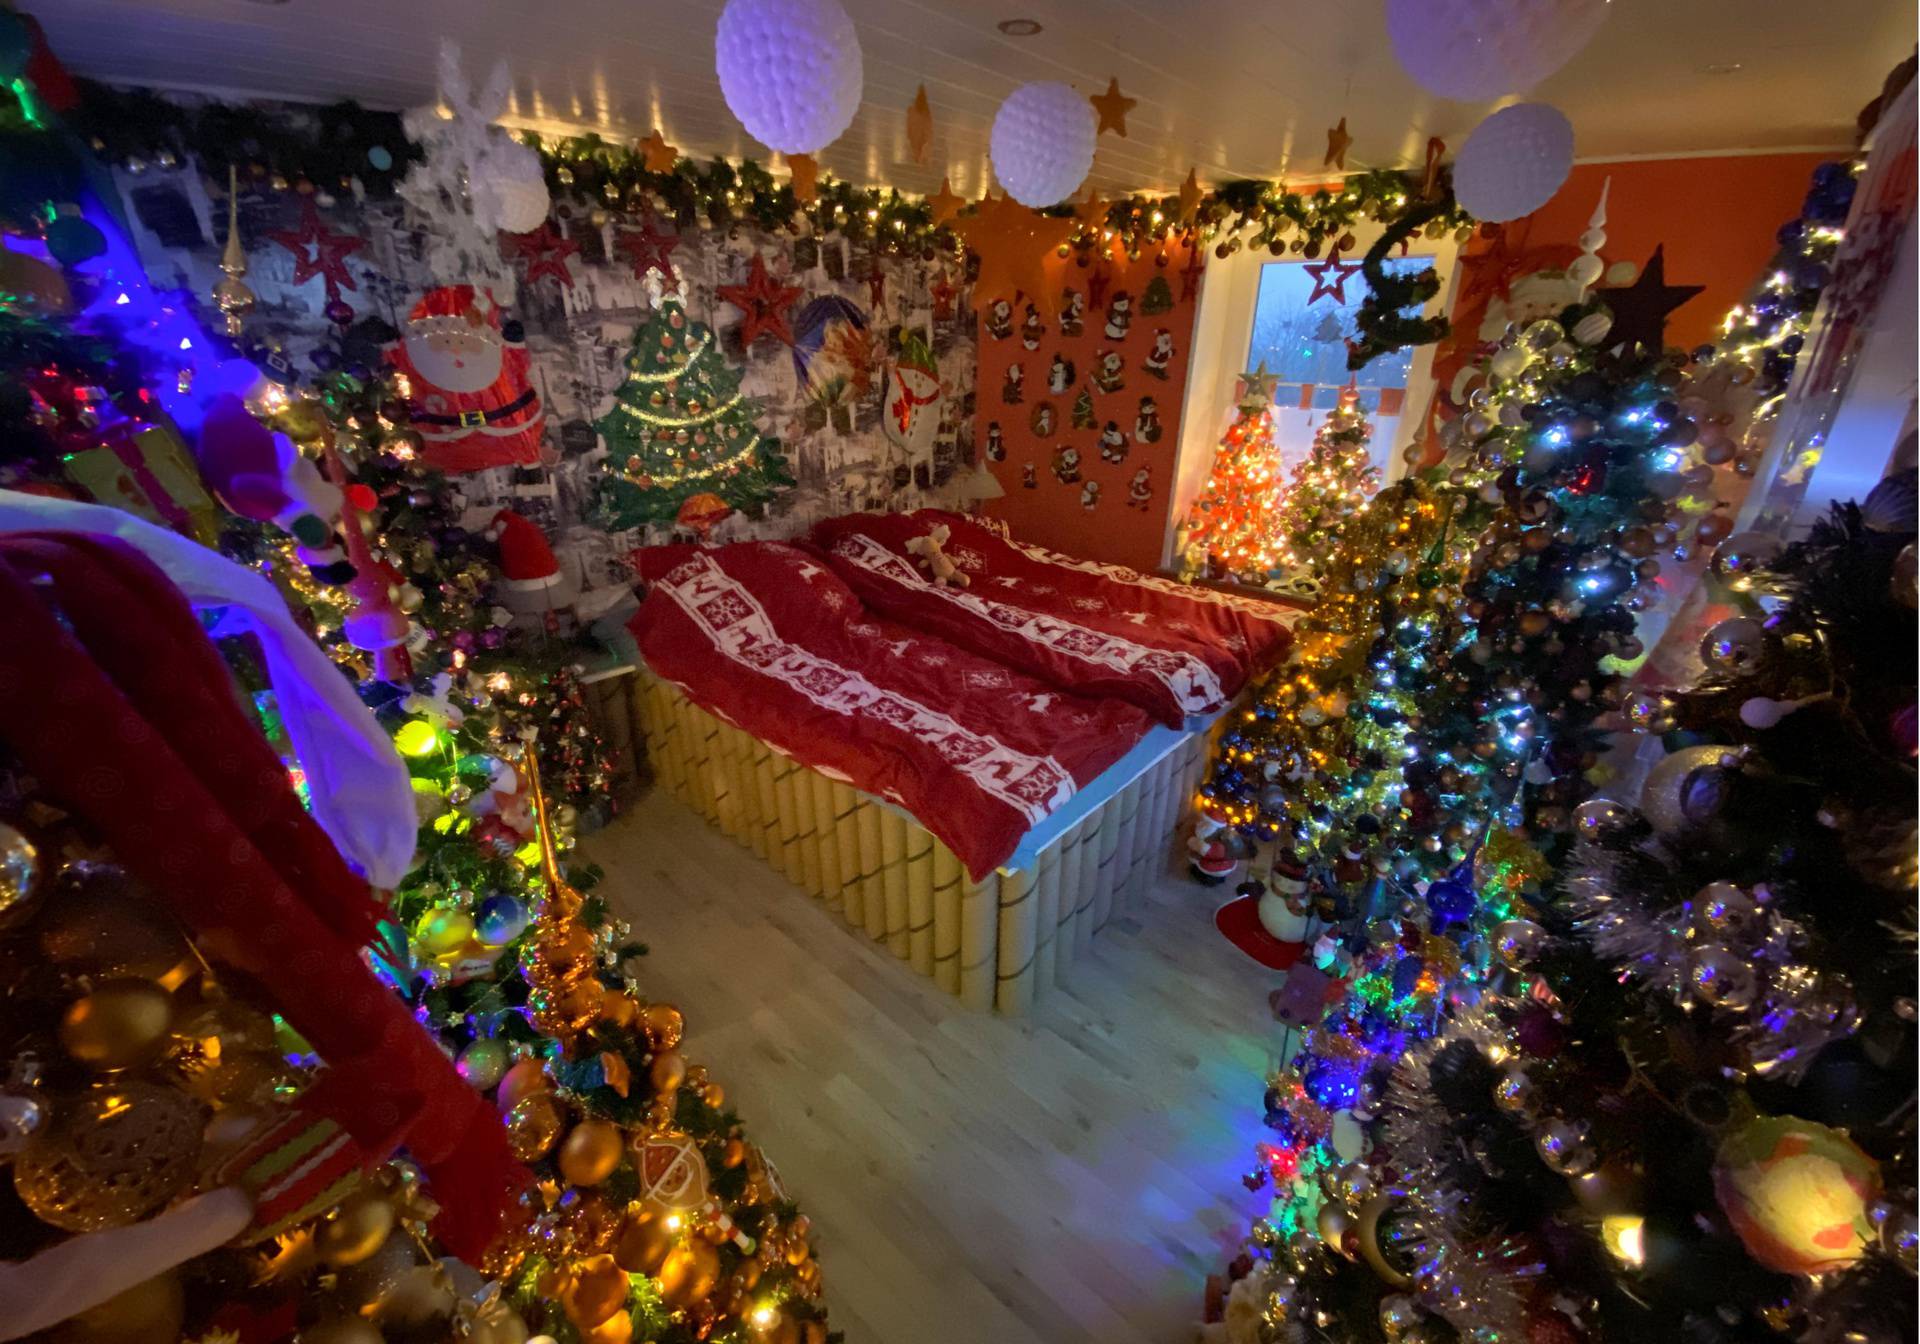 A couple in the German town of Rinteln wins the world record title with their 444 Christmas trees in one home